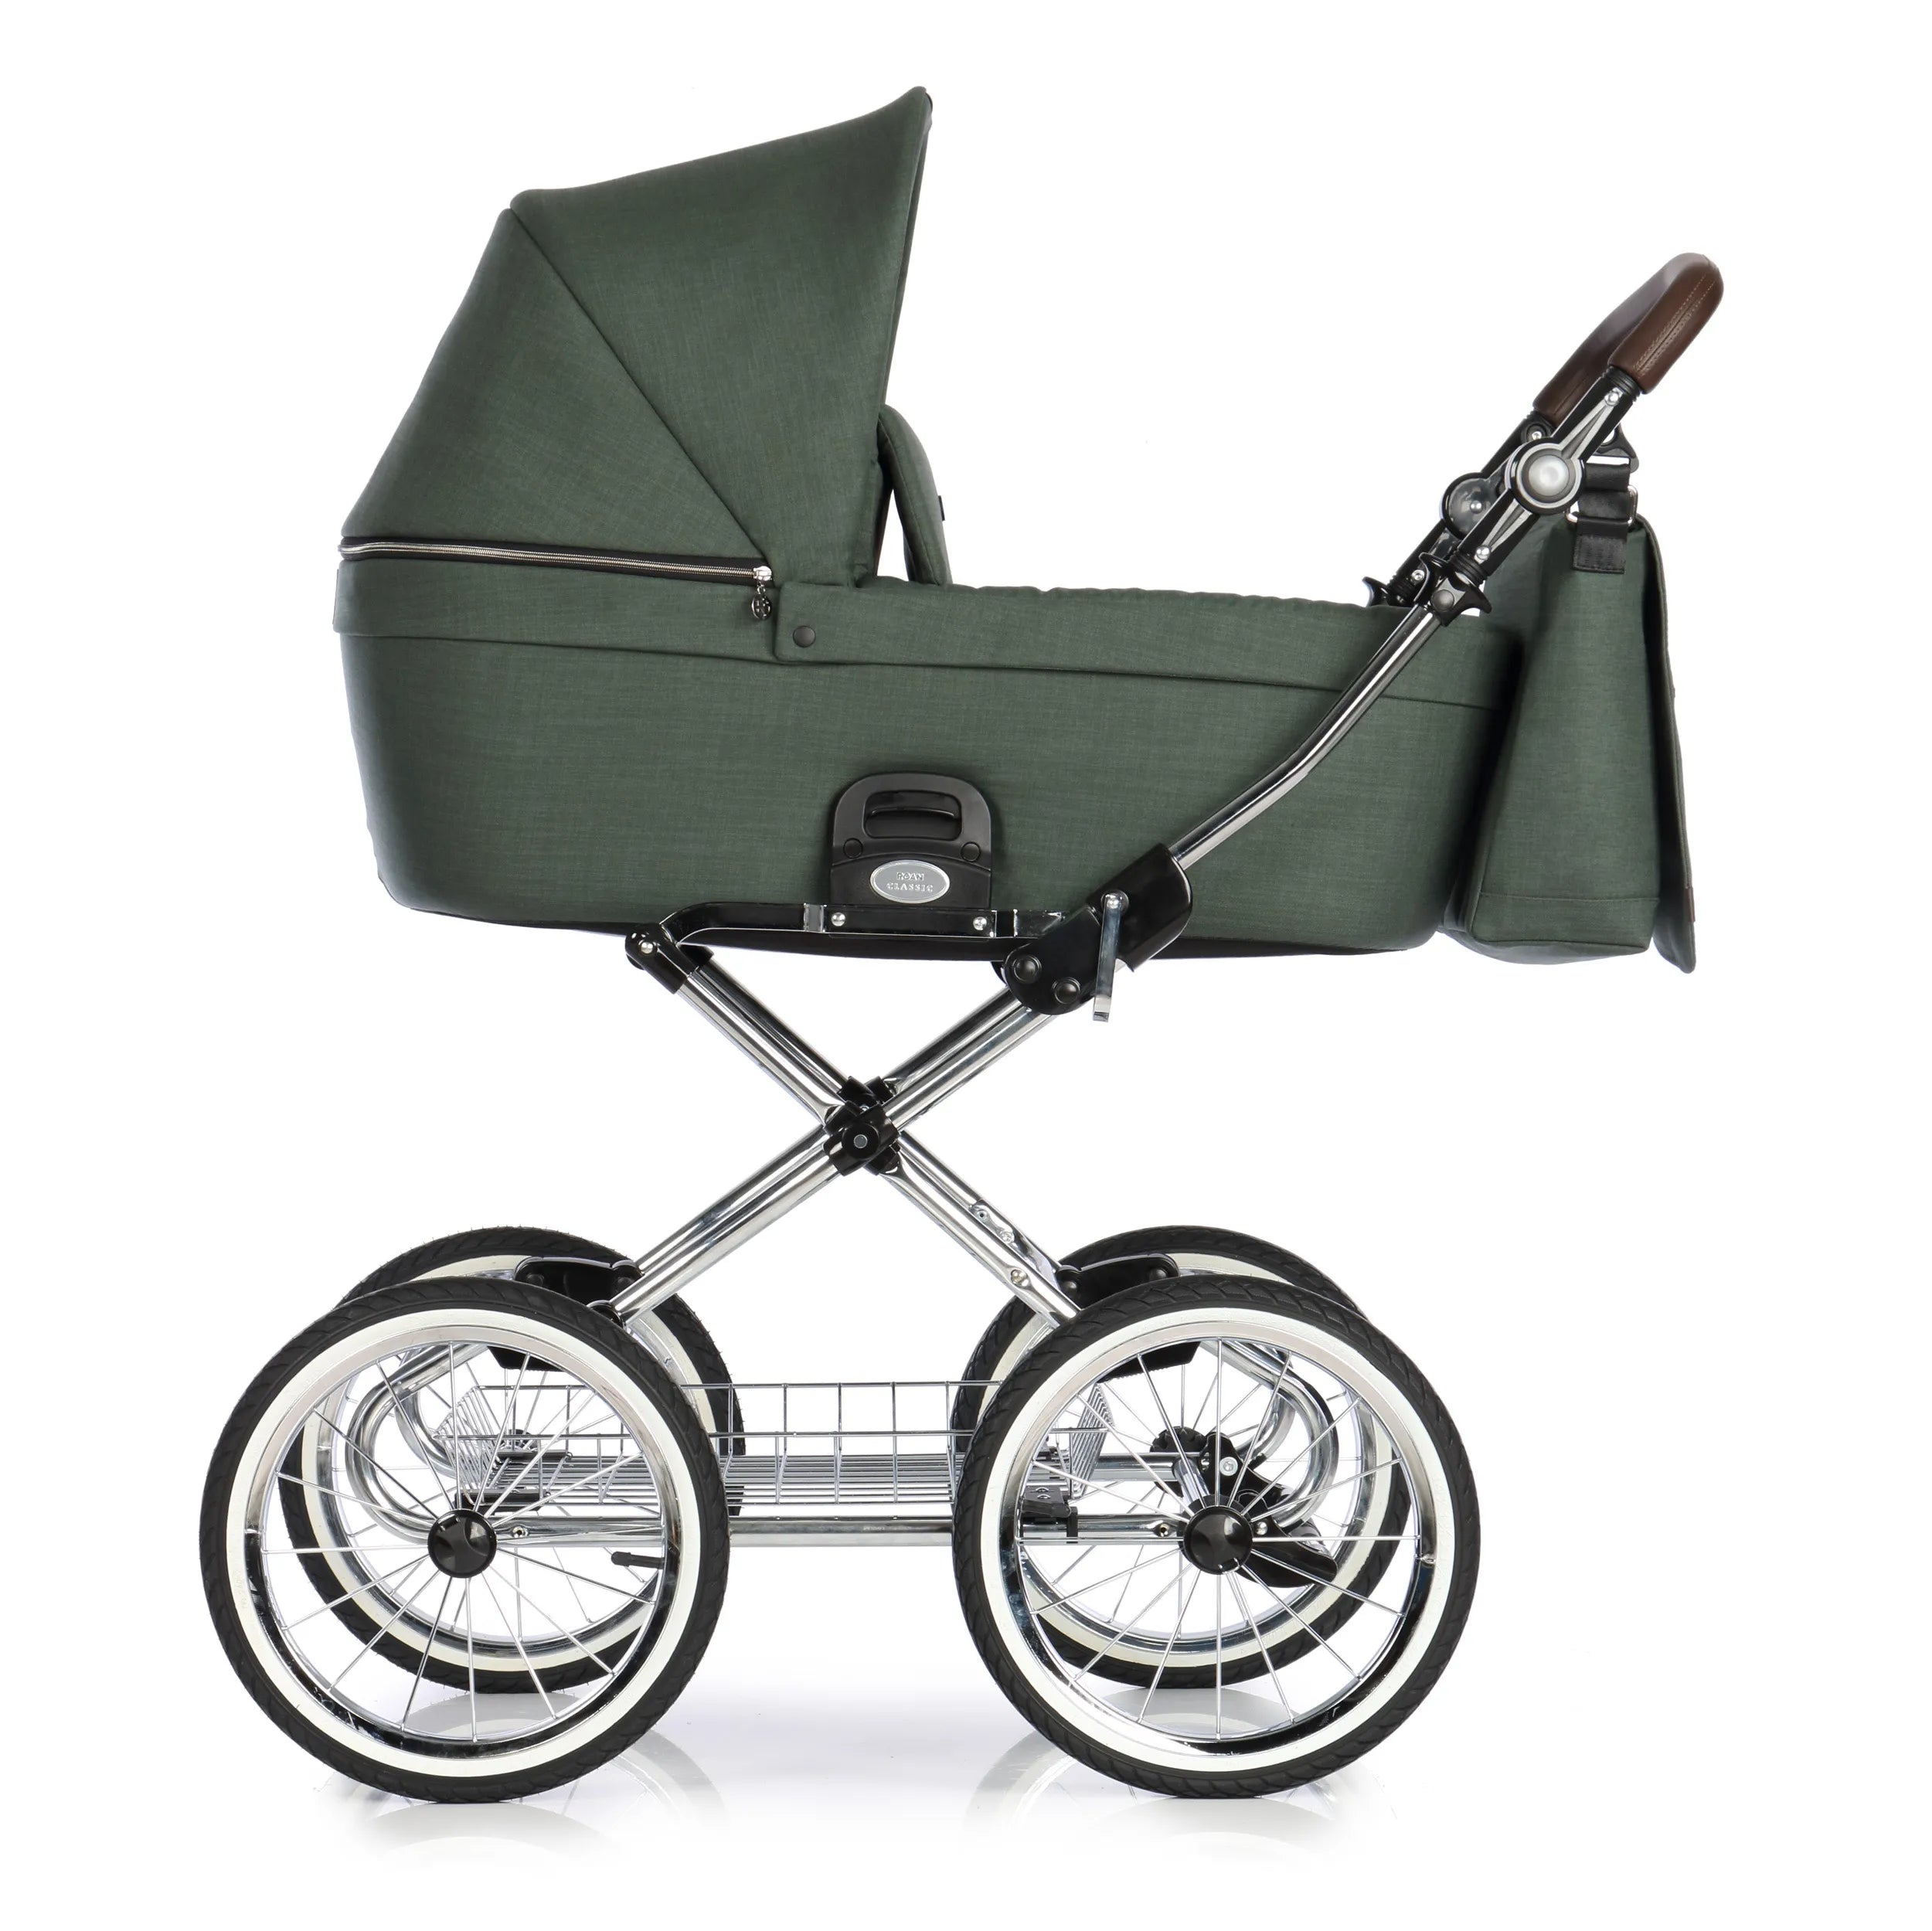 Roan COSS CLASSIC baby stroller carry cot and stroller, color Night Green